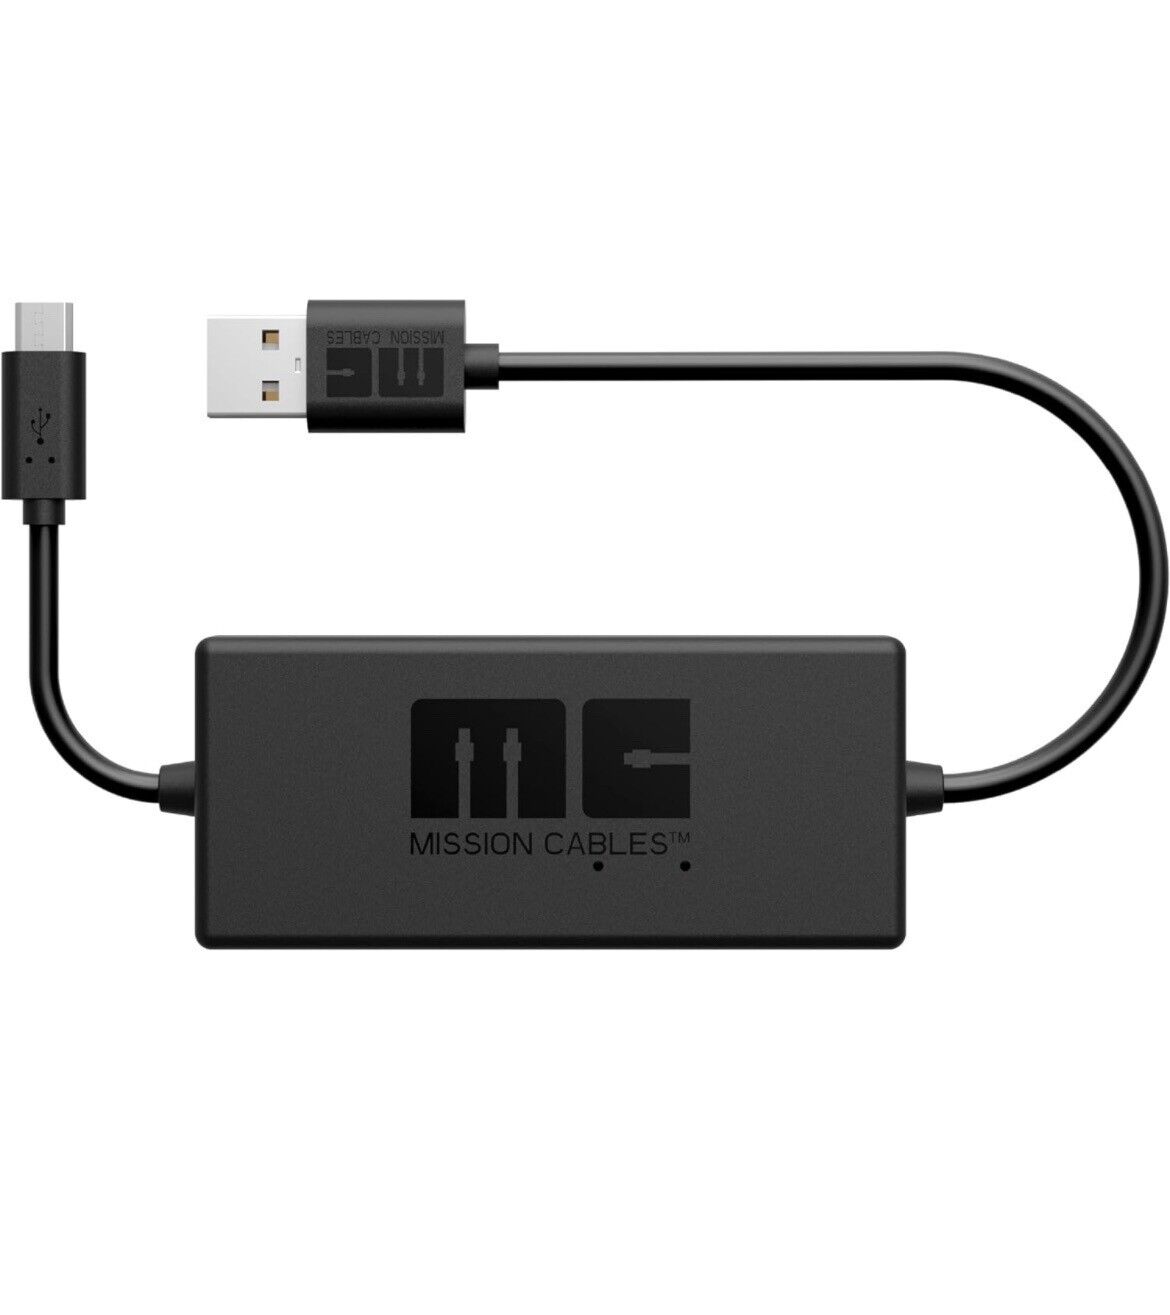 Mission Cables MC45 USB Power Cable for Amazon Fire TV